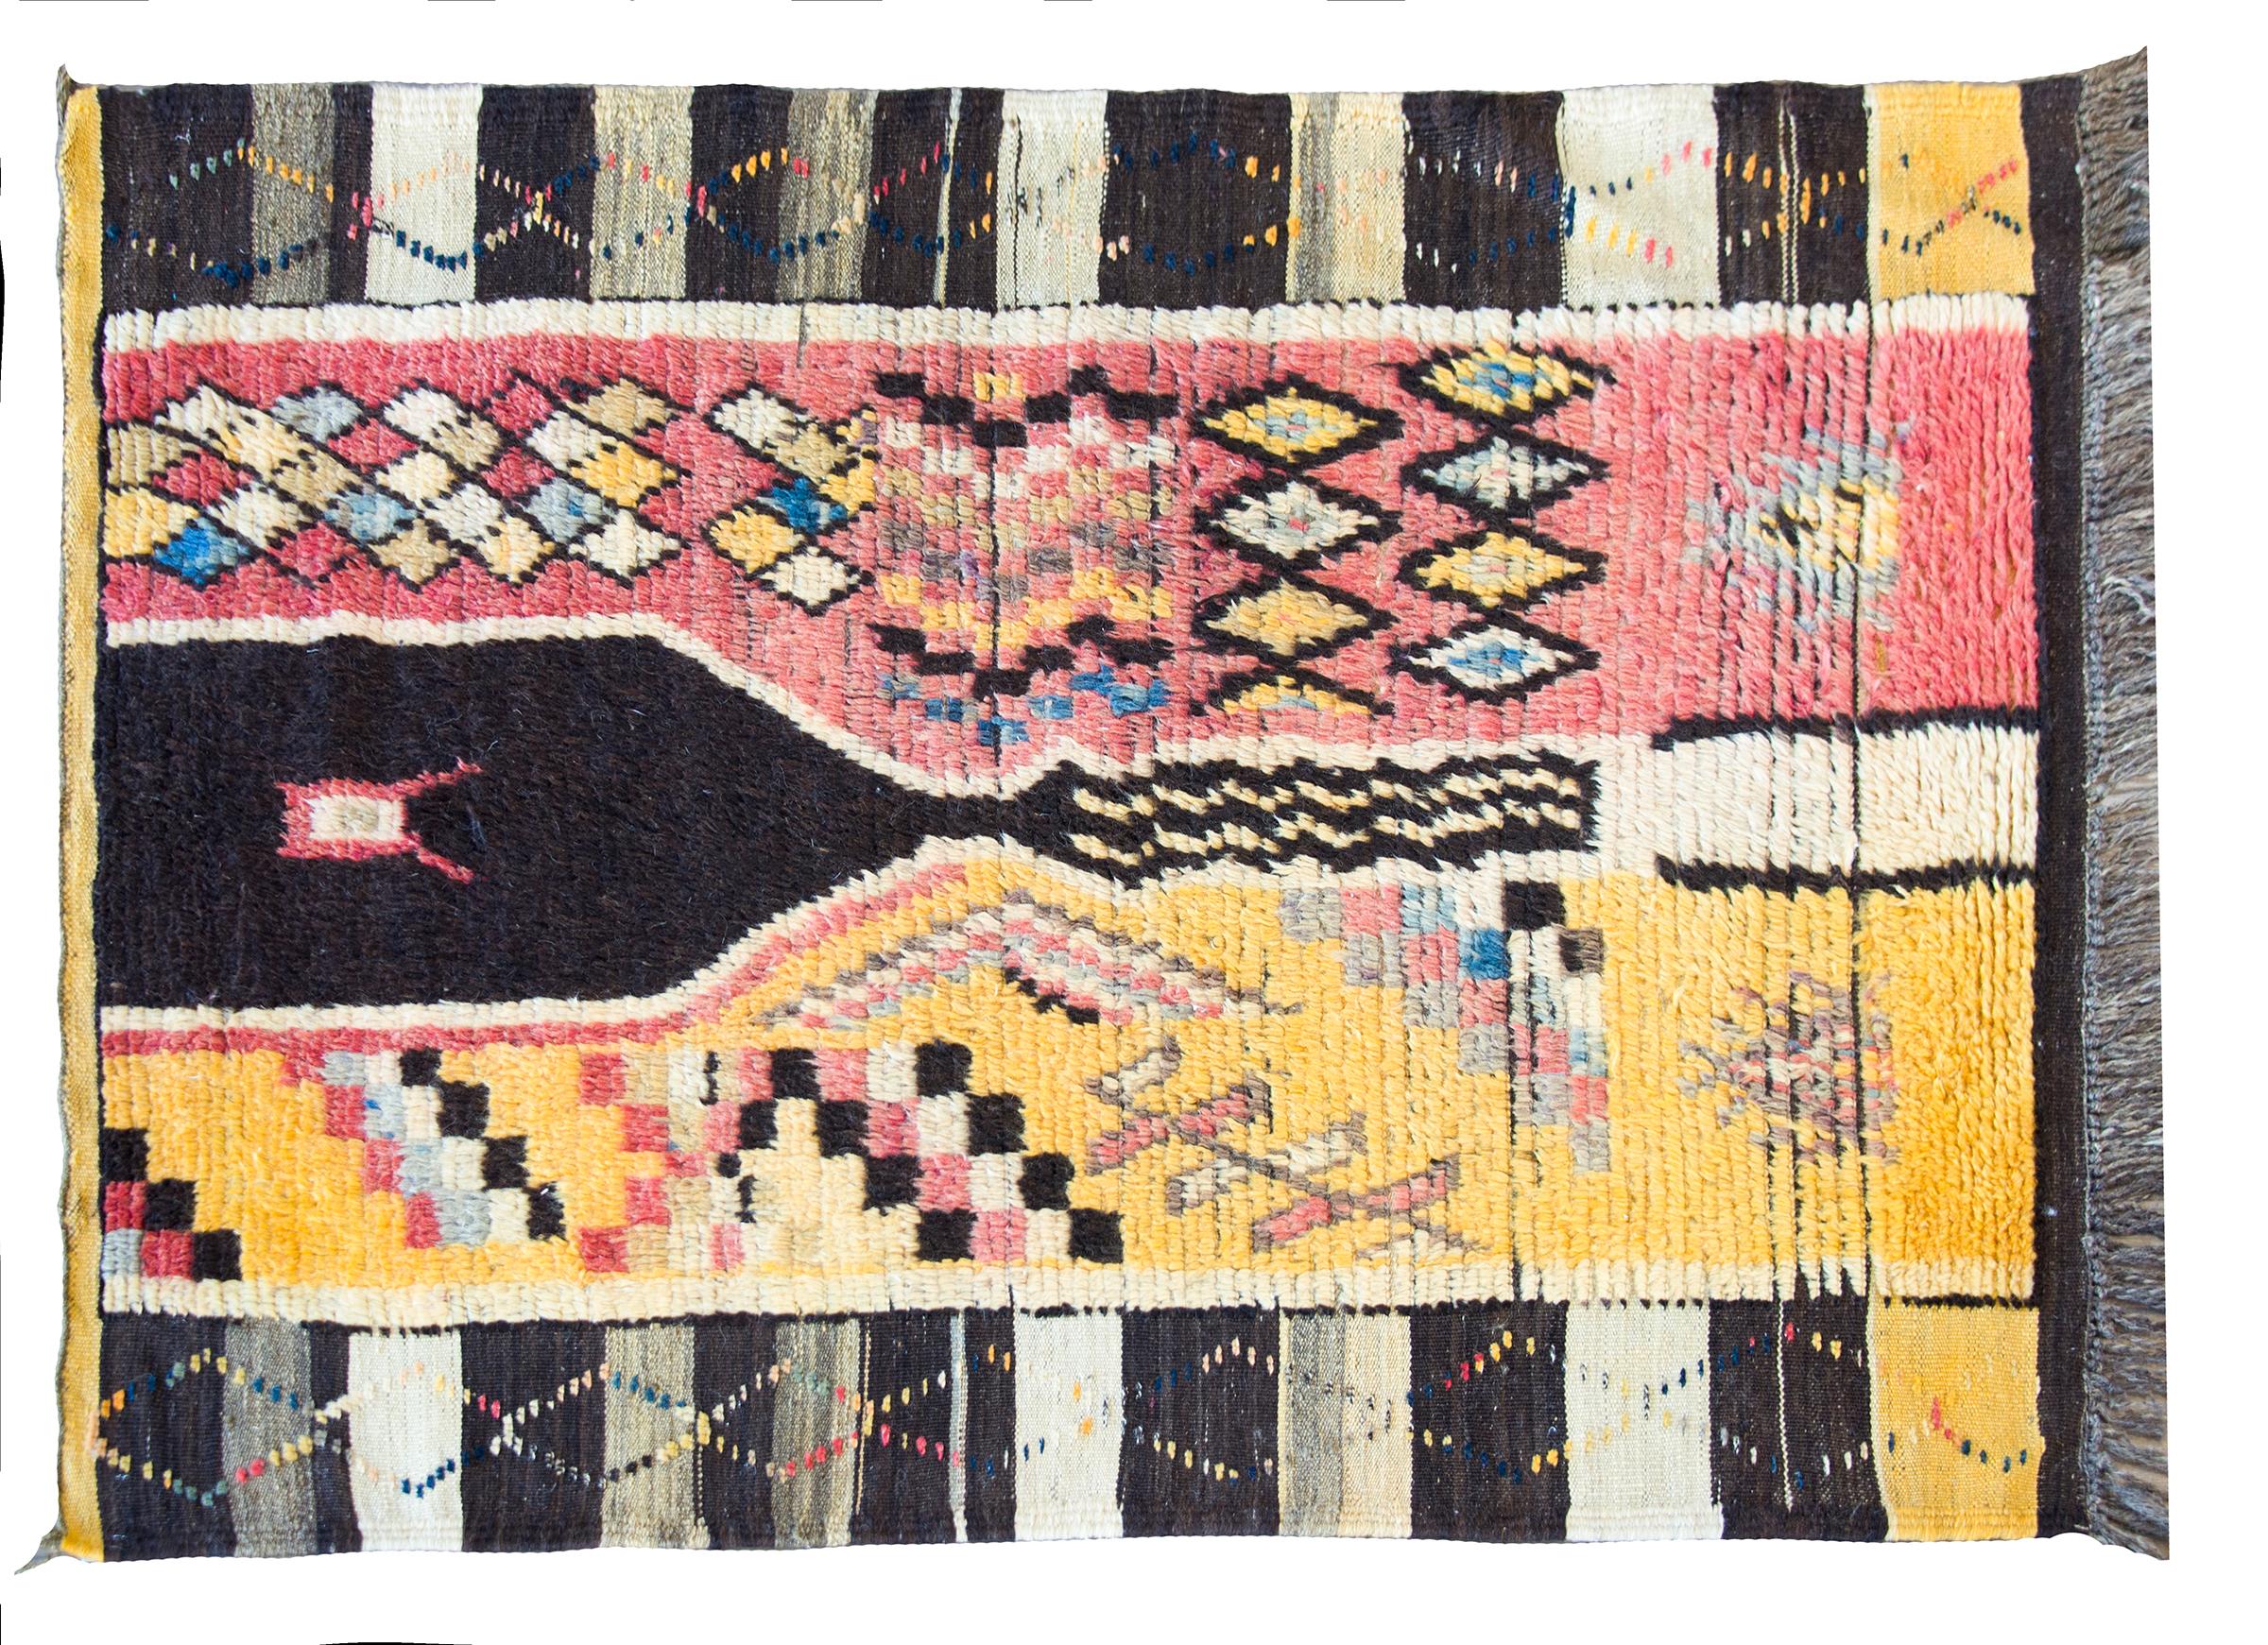 A wonderful mid-20th century Moroccan rug with a beautiful modernist pattern with multi-colored diamonds and stylized flowers, with a fantastic black and white striped border.